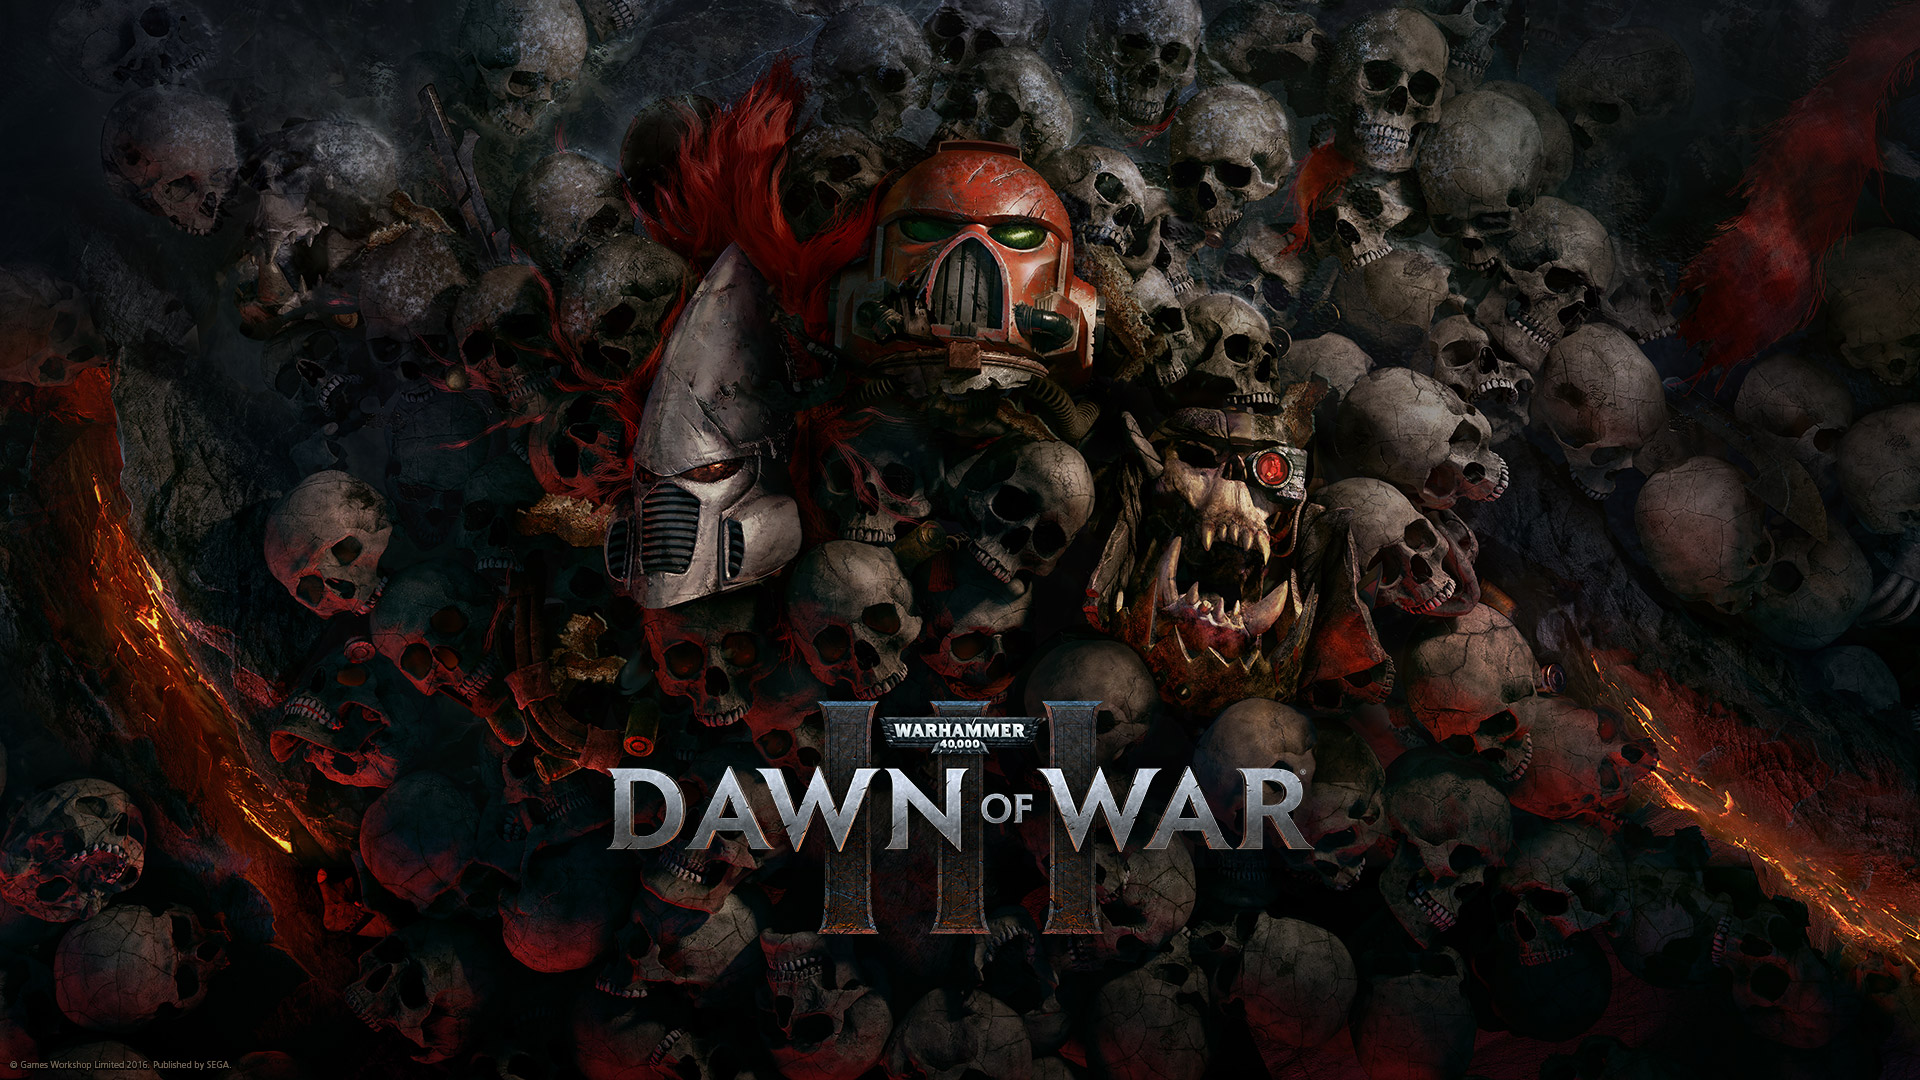 Cover art for Dawn of War III